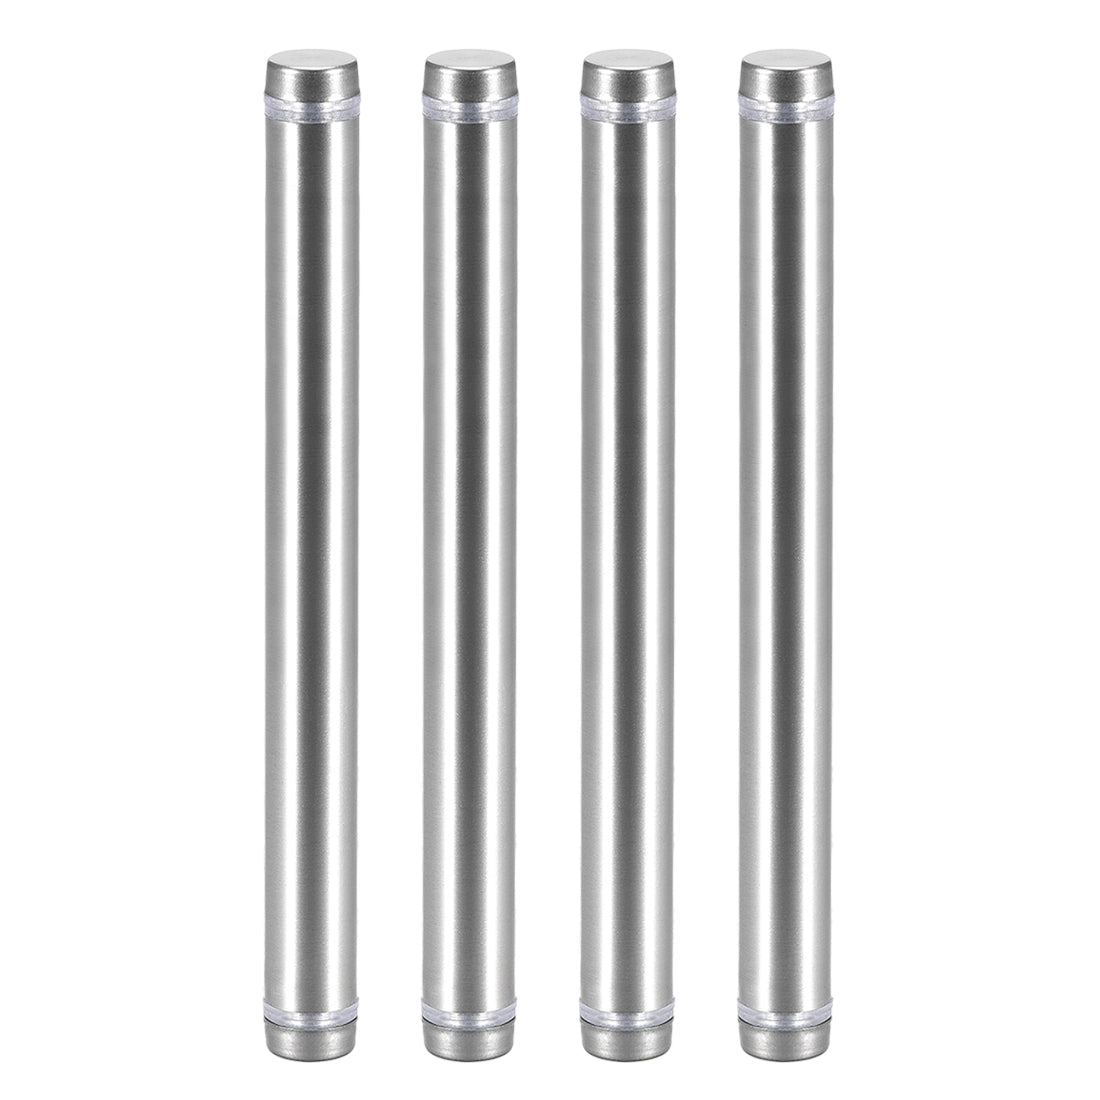 uxcell Uxcell Glass Standoff Double Head Stainless Steel Standoff Holder 12mm x 134mm 4 Pcs